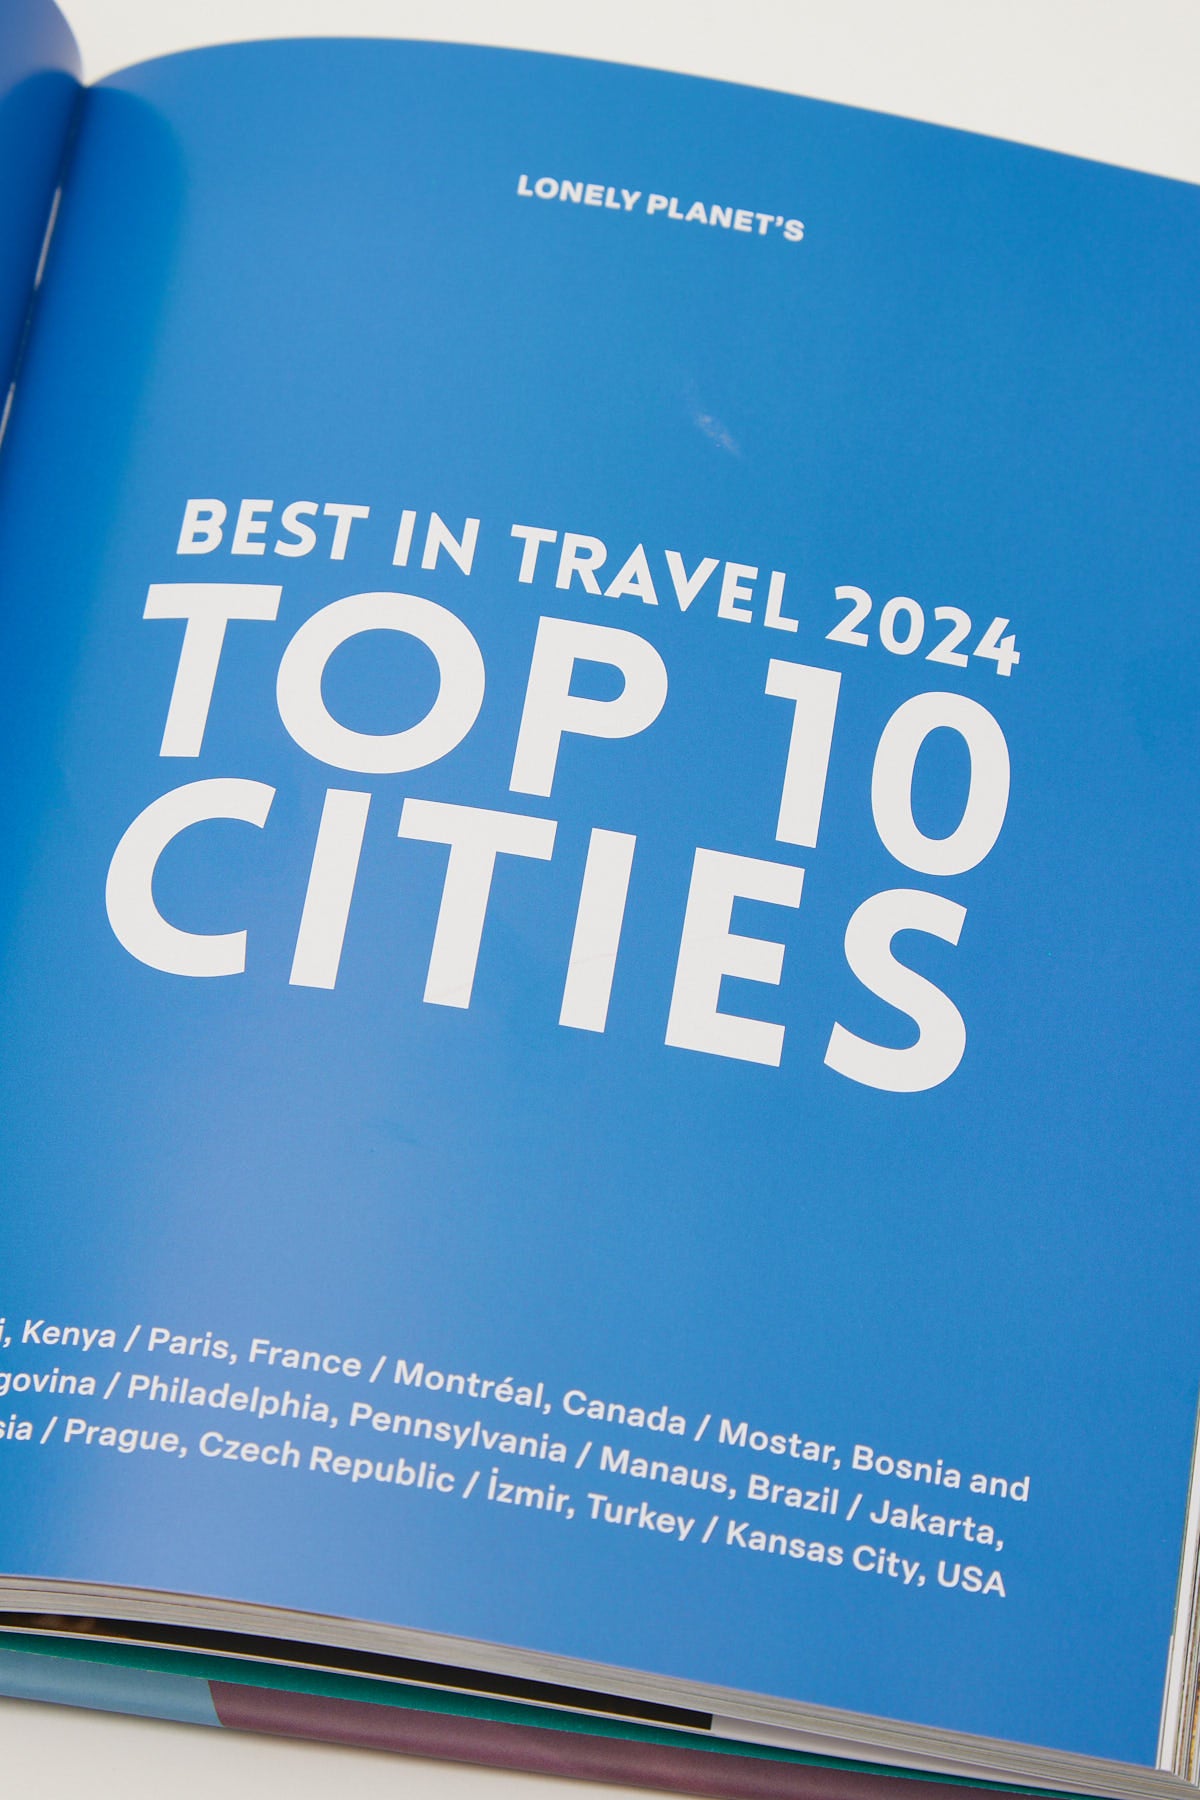 Lonely Planet's Best in Travel 2024 Multi